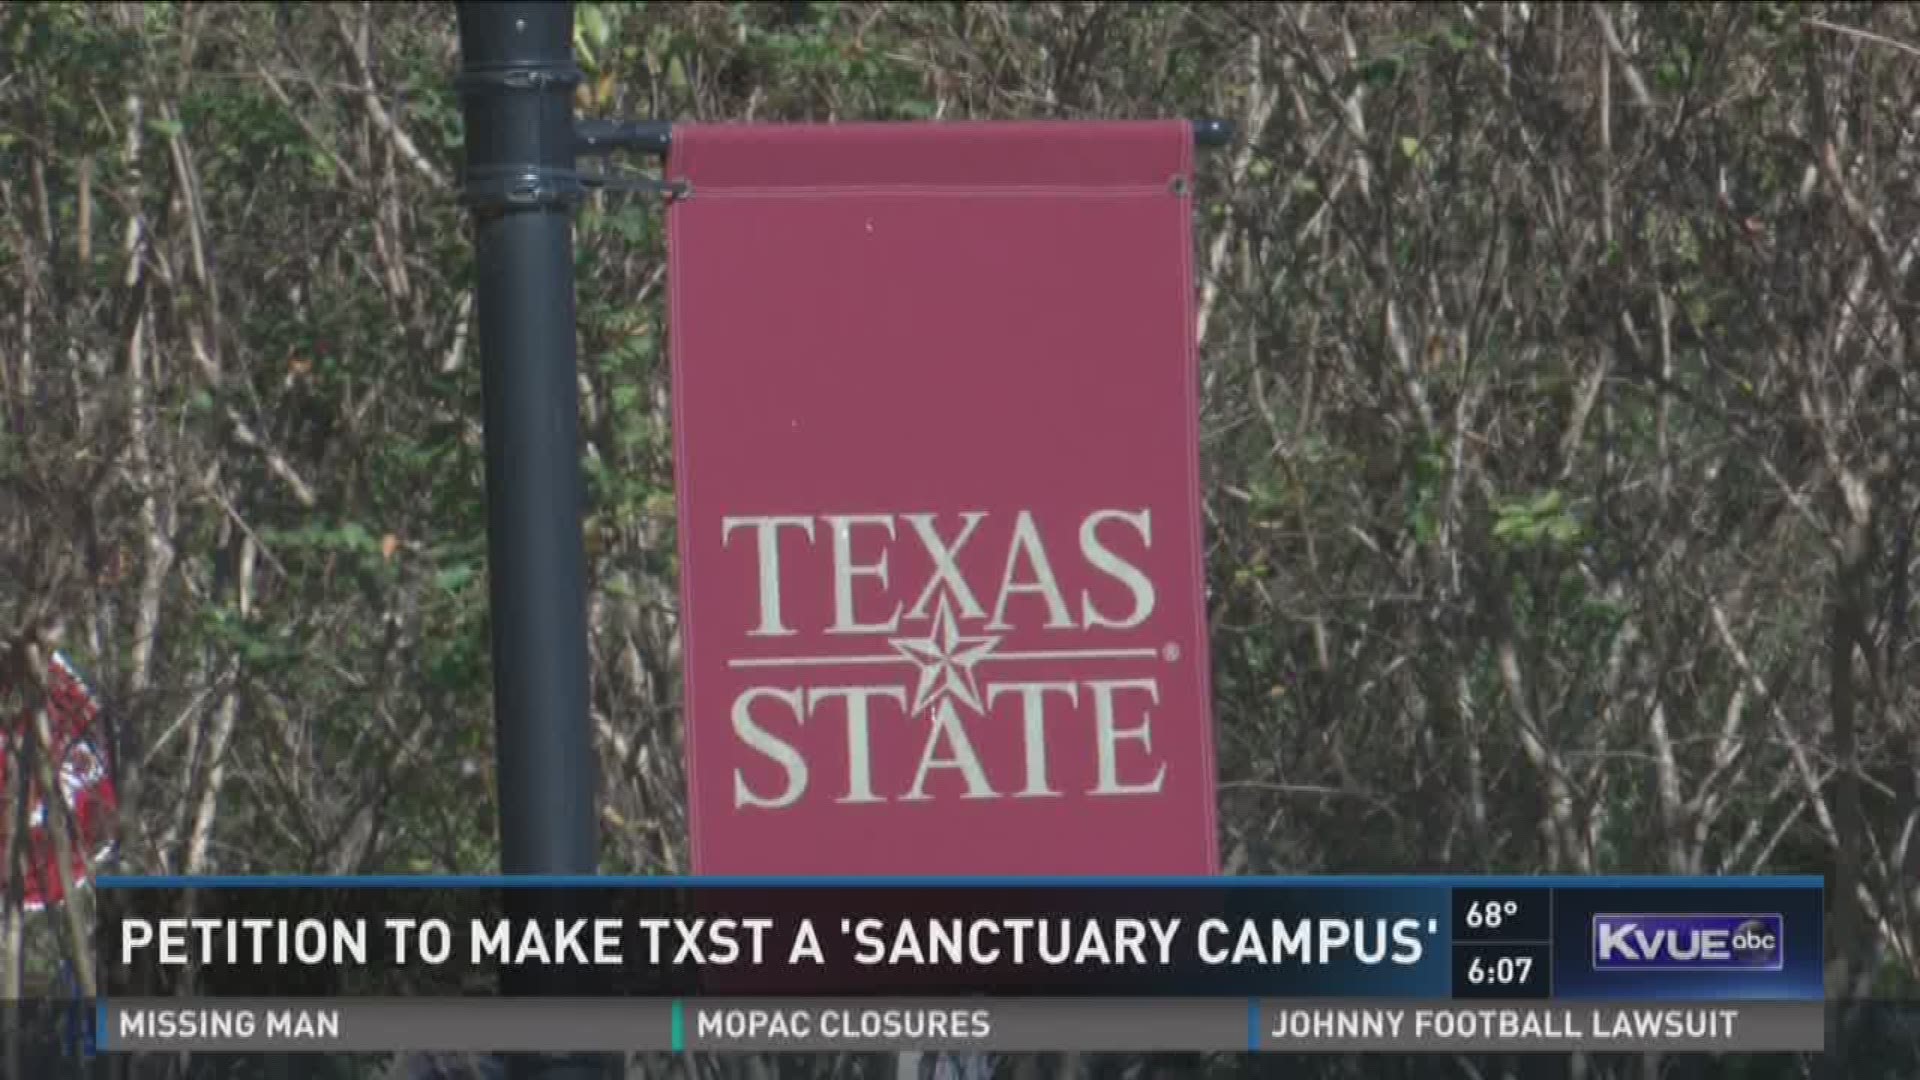 Petition to make TXST a 'Sanctuary Campus'